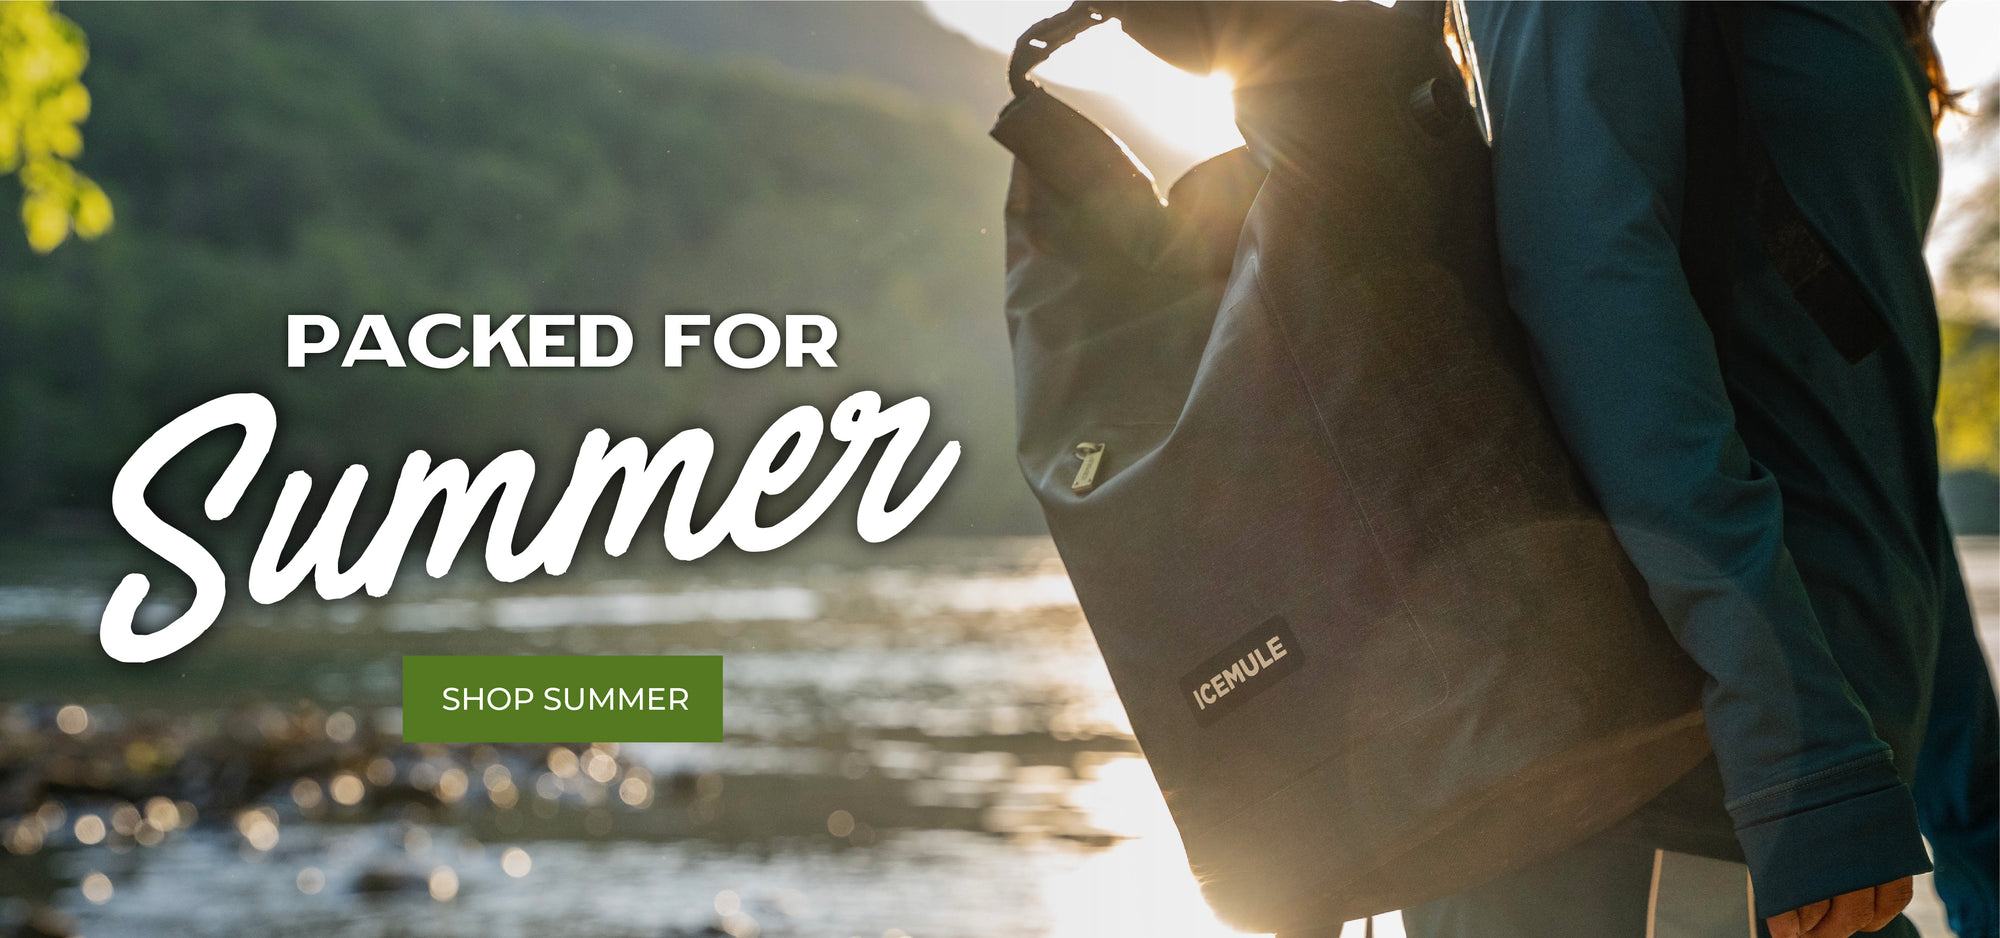 Graphic banner image for Summer promo featuring person hiking with backpack